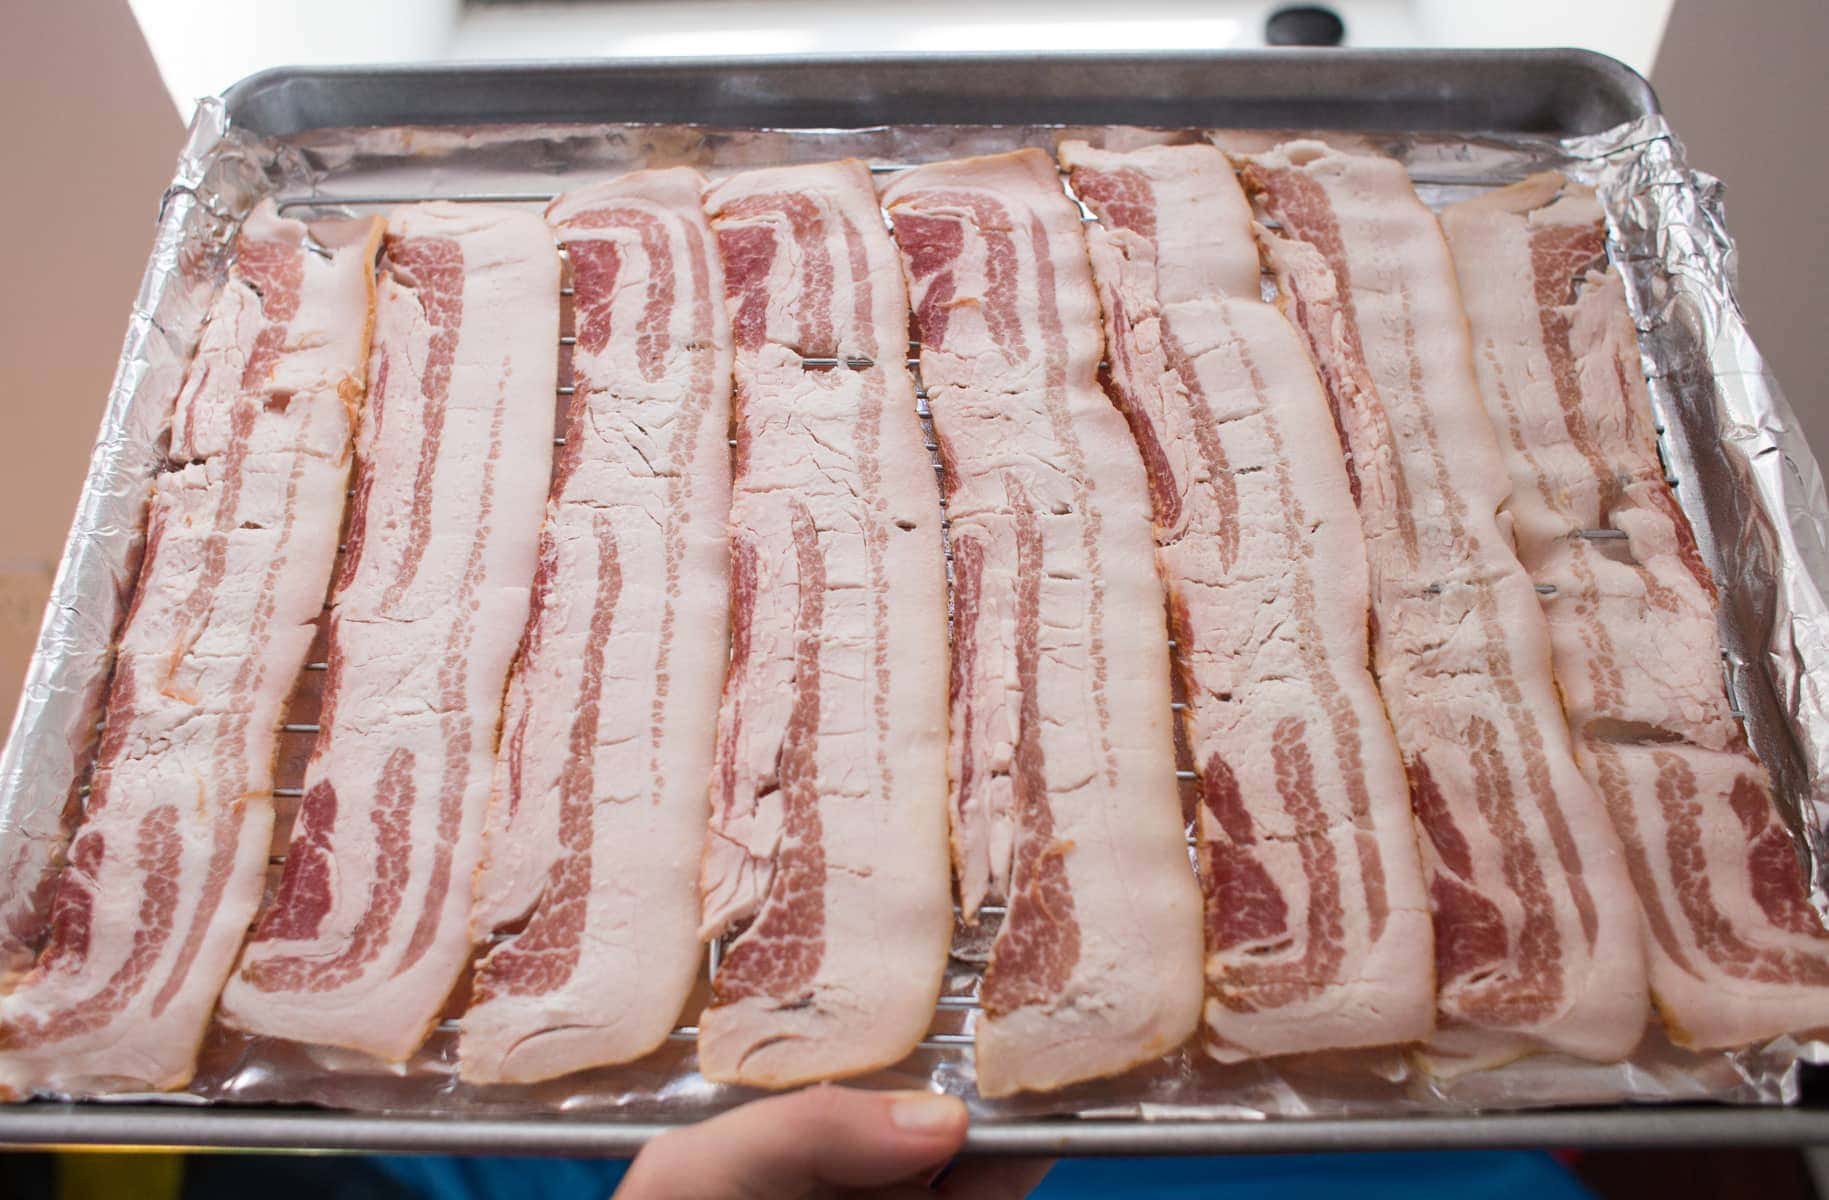 How to cook Bacon in the oven